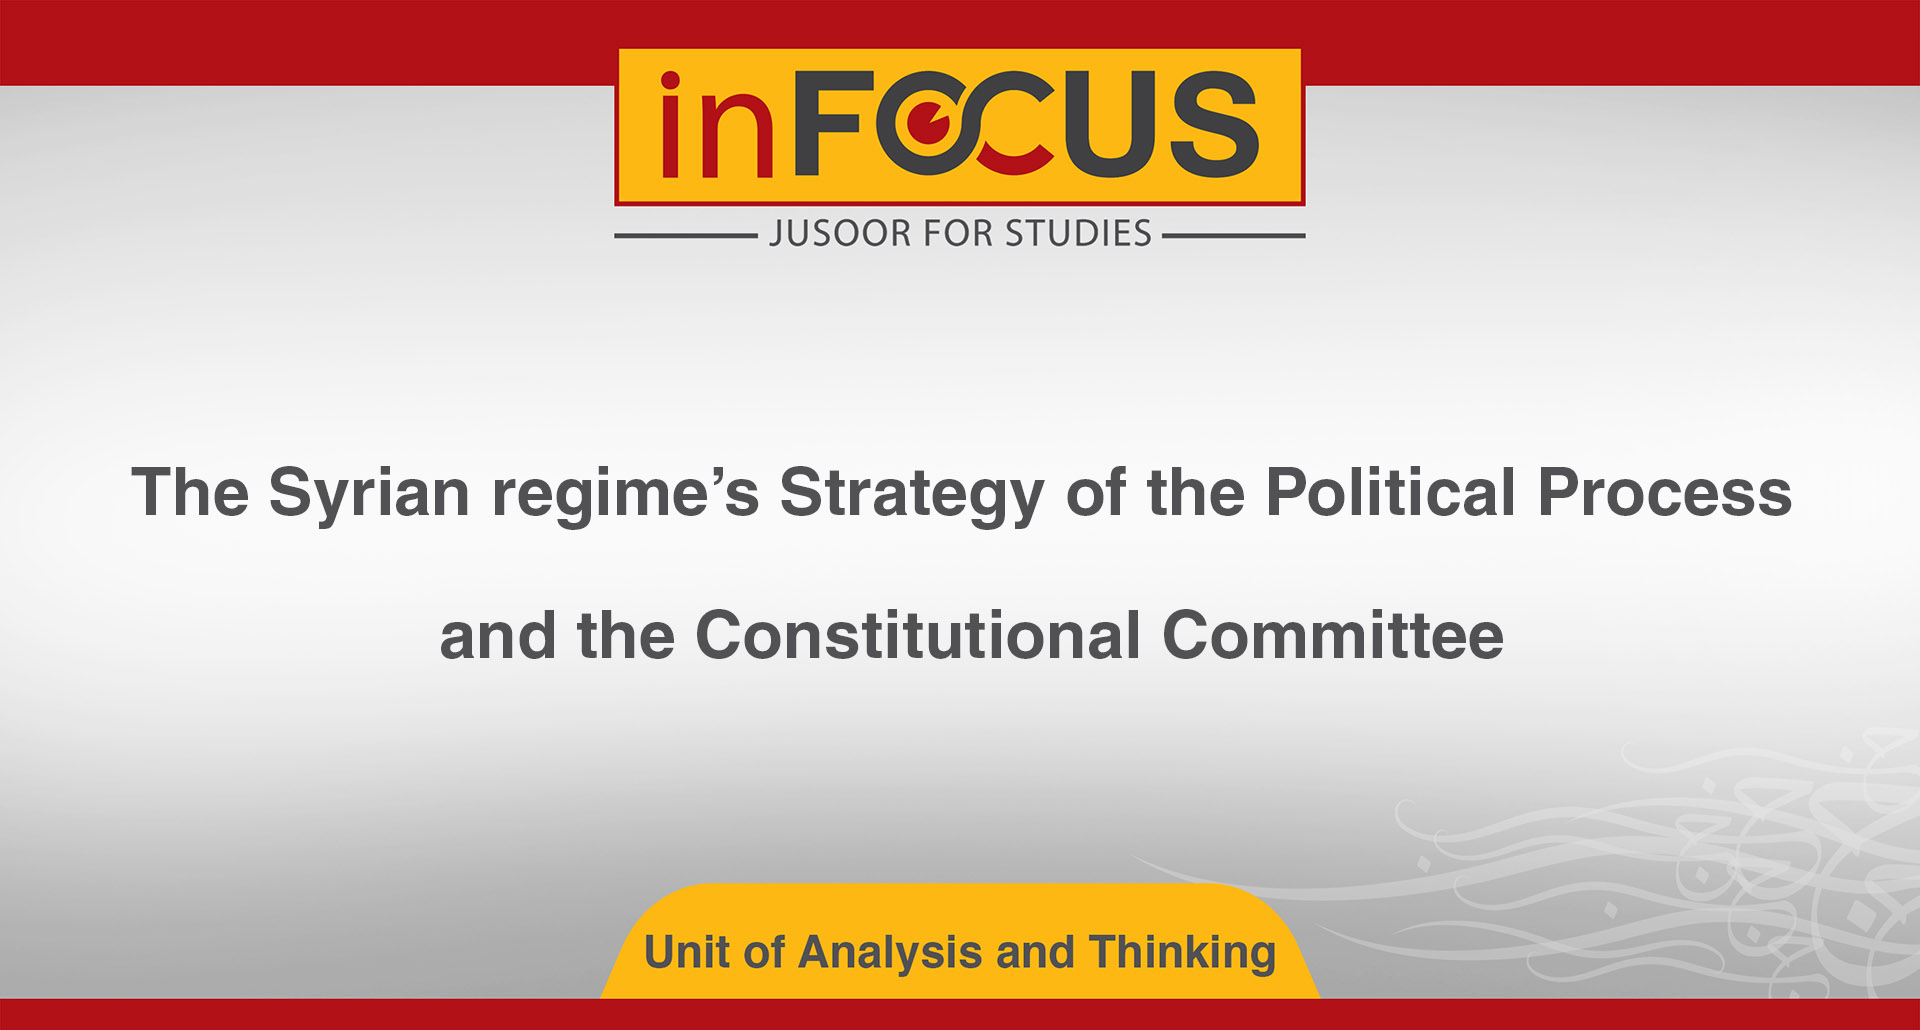 The Syrian regime’s Strategy of the Political Process and the Constitutional Committee